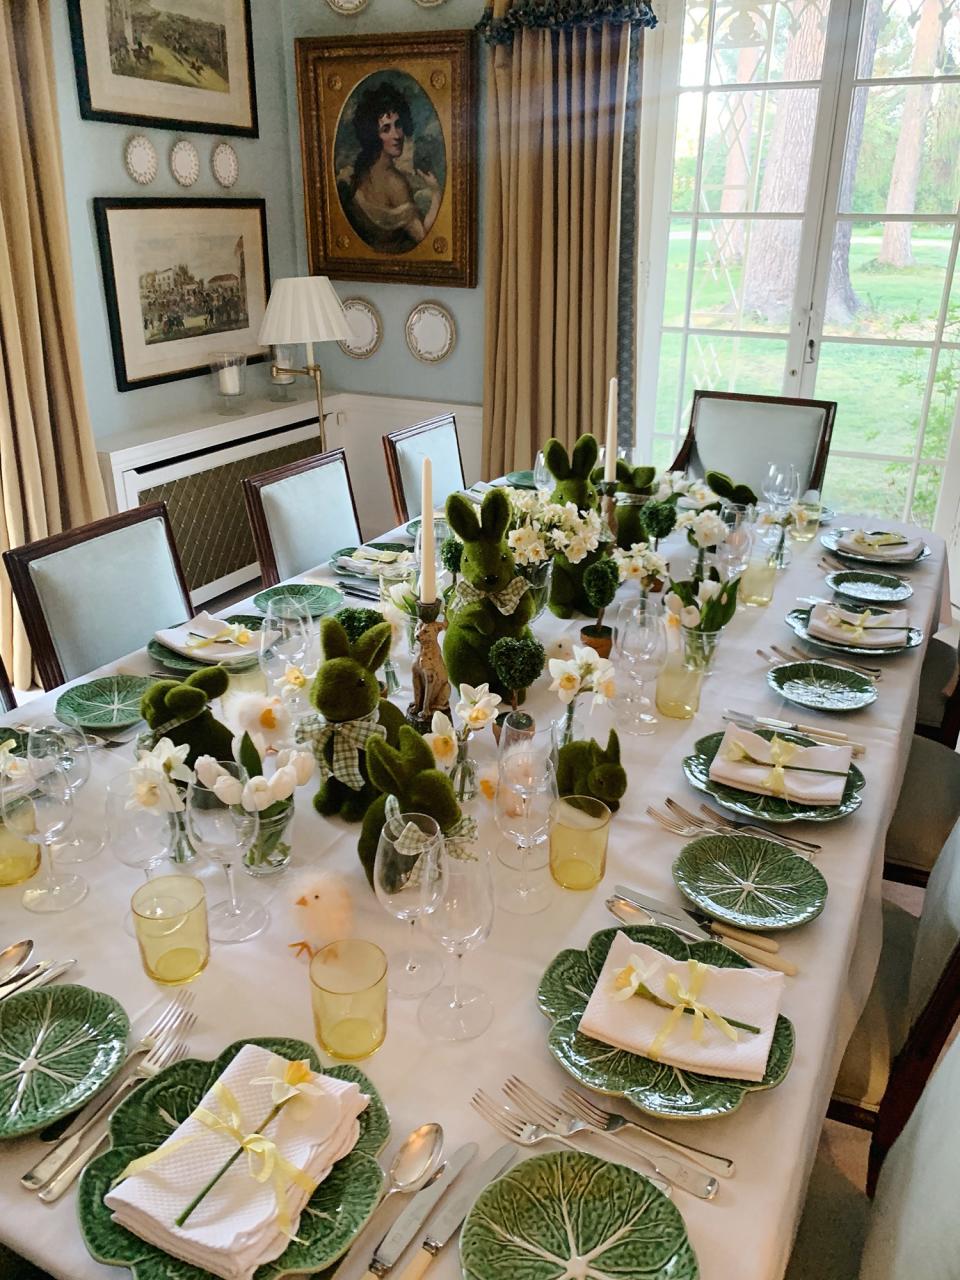 Grass green bunnies, daffodils and Bordhallo Pinhiero cabbage plates line the table on Friday evening. We ate seared tuna, whole turbot and honeycomb parfait.